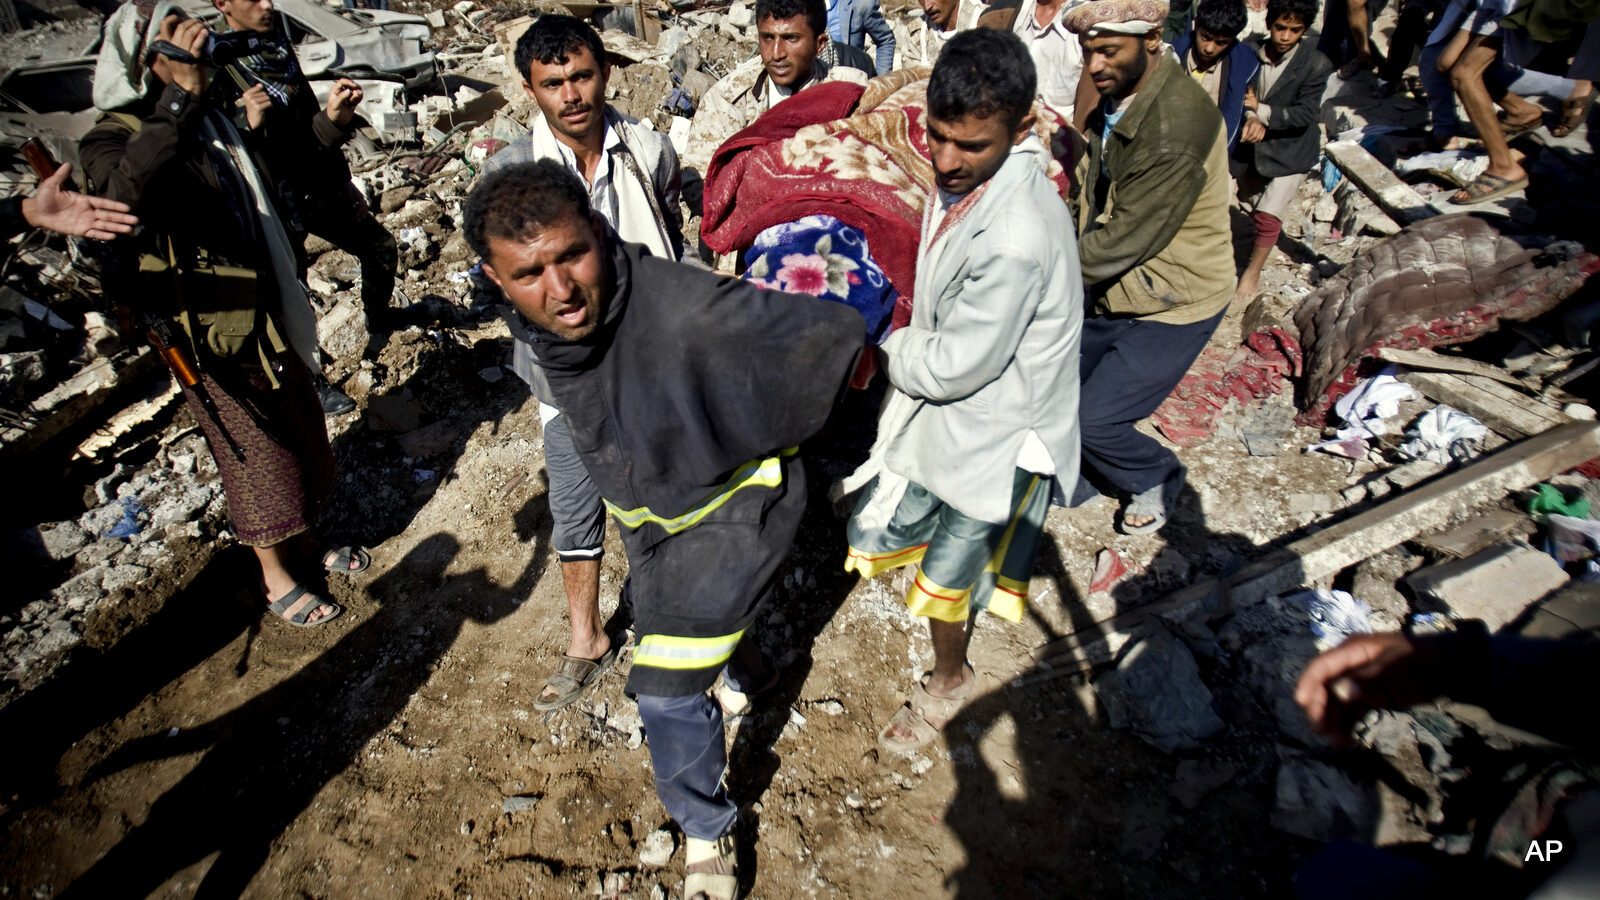 People carry the body of a woman covered with a blanket from under the rubble of houses destroyed by Saudi airstrikes near Sanaa Airport, Yemen, Thursday, March 26, 2015. Saudi Arabia launched airstrikes Thursday targeting military installations in Yemen held by Shiite rebels who were taking over a key port city in the country's south and had driven the embattled president to flee by sea, security officials said. (AP Photo/Hani Mohammed)